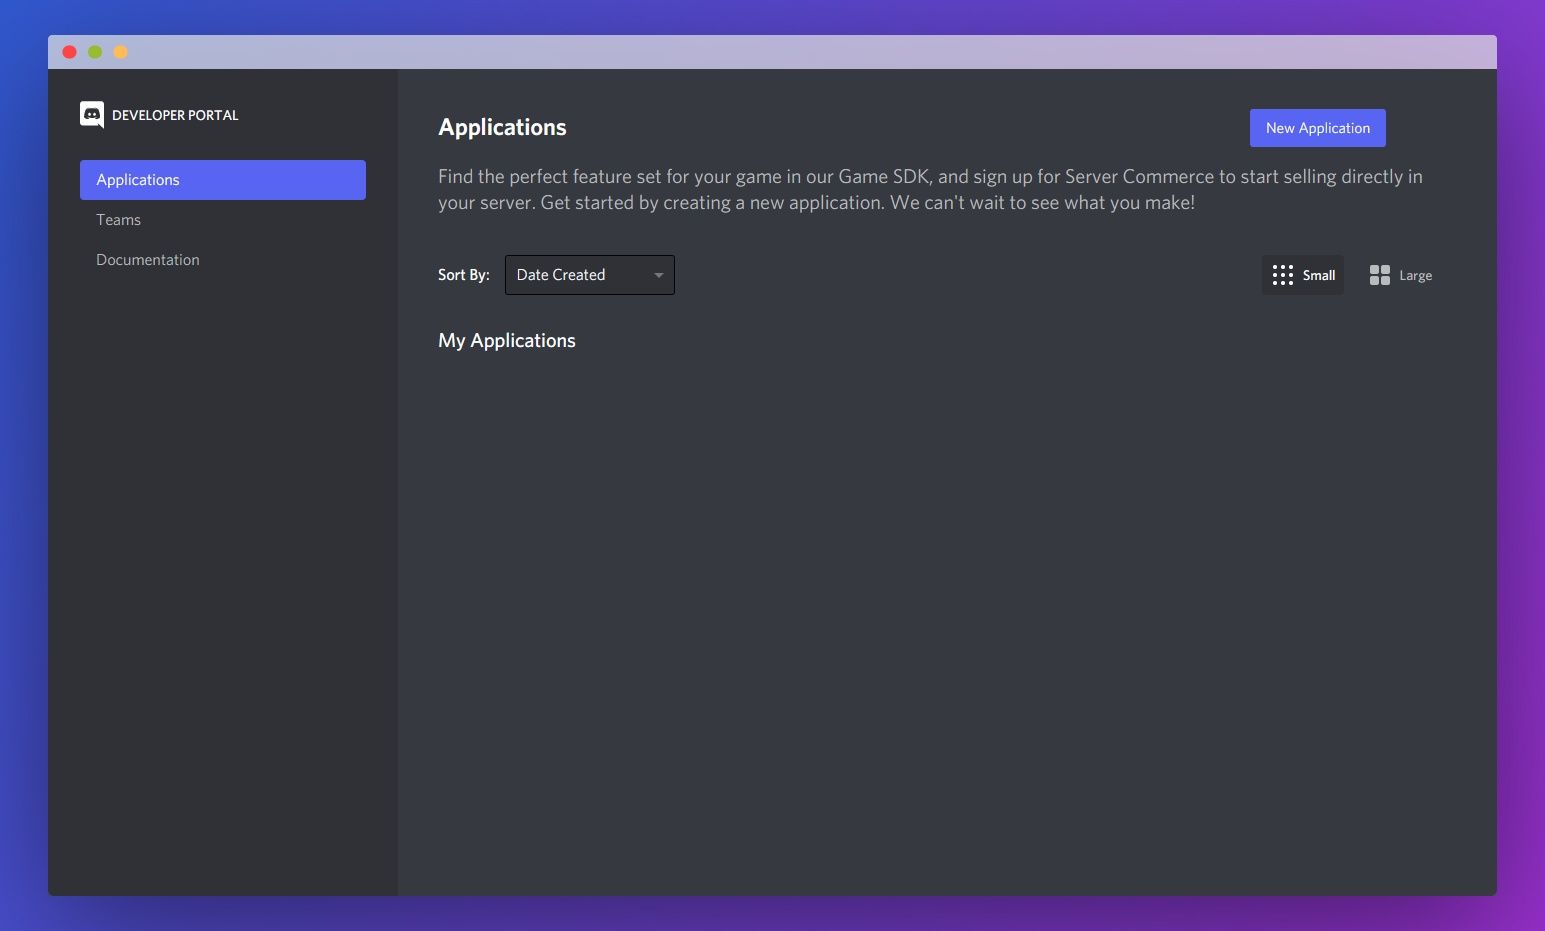 The discord applications tab in the developer portal - sidebar with teams and documentation on the left with an "applications" heading in the main pane and a blue-purple "New Application" button next to it.